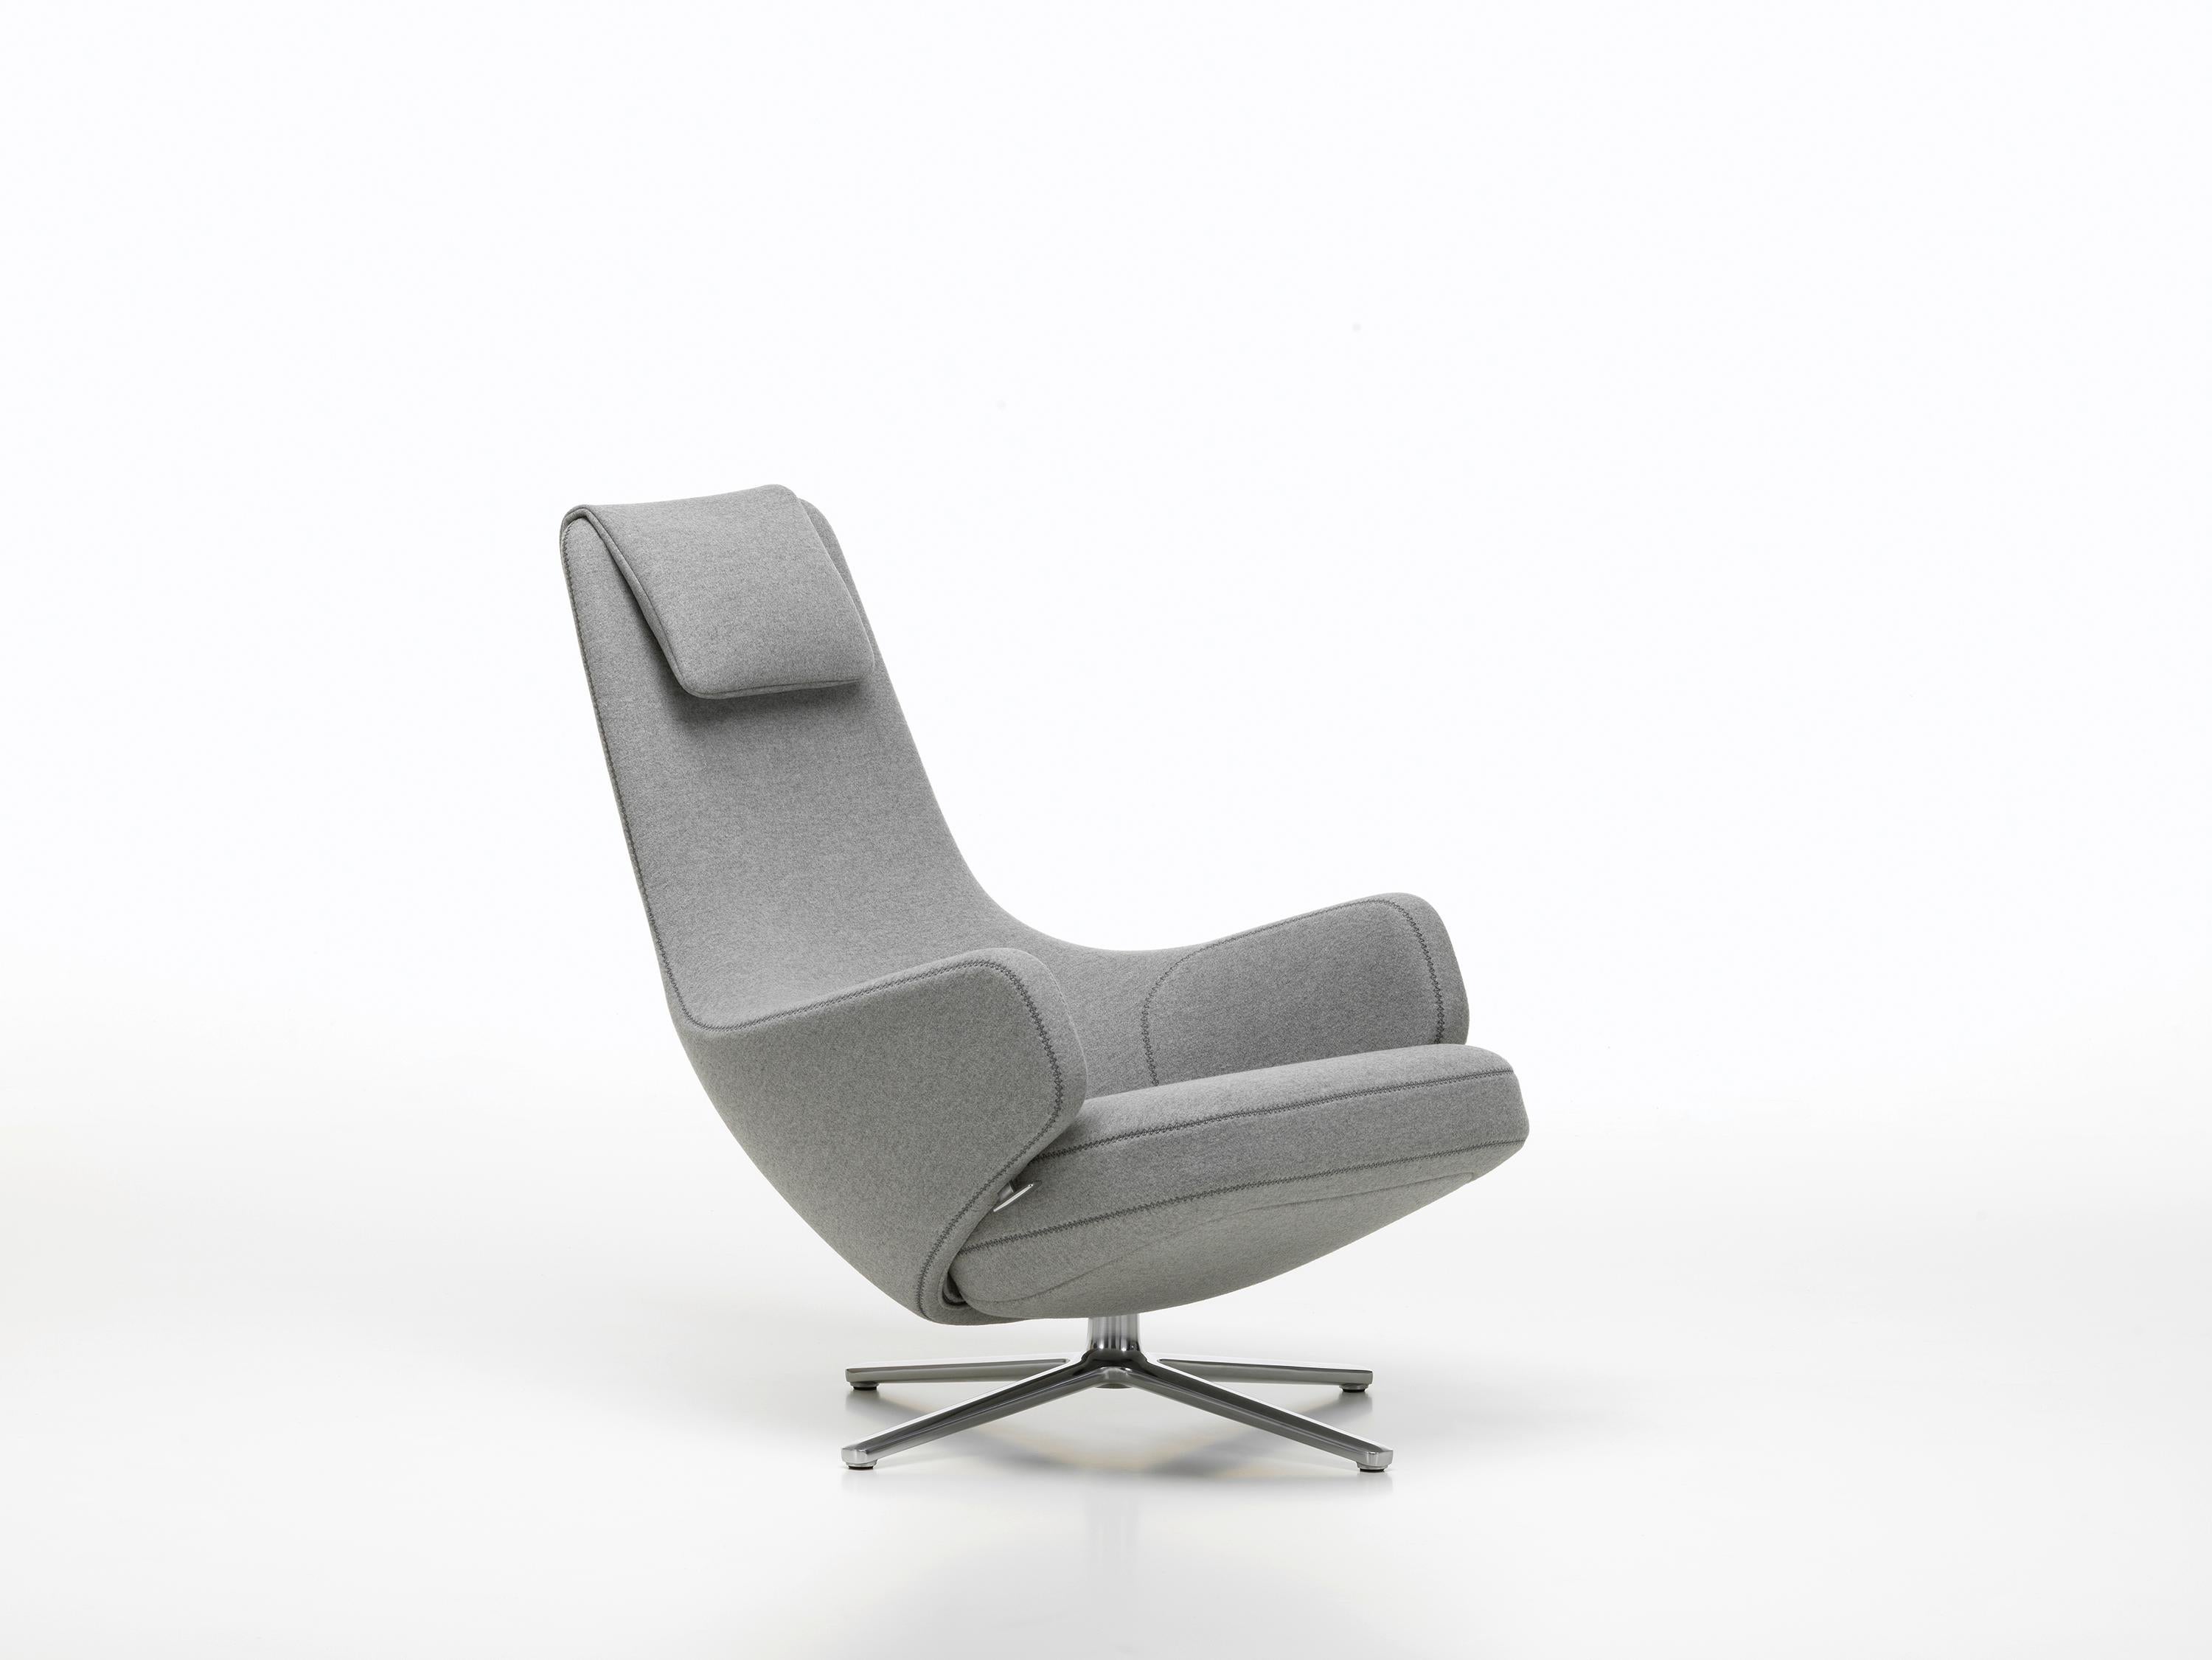 Swiss Vitra Repos Lounge Chair in Pebble Grey Cosy by Antonio Citterio For Sale